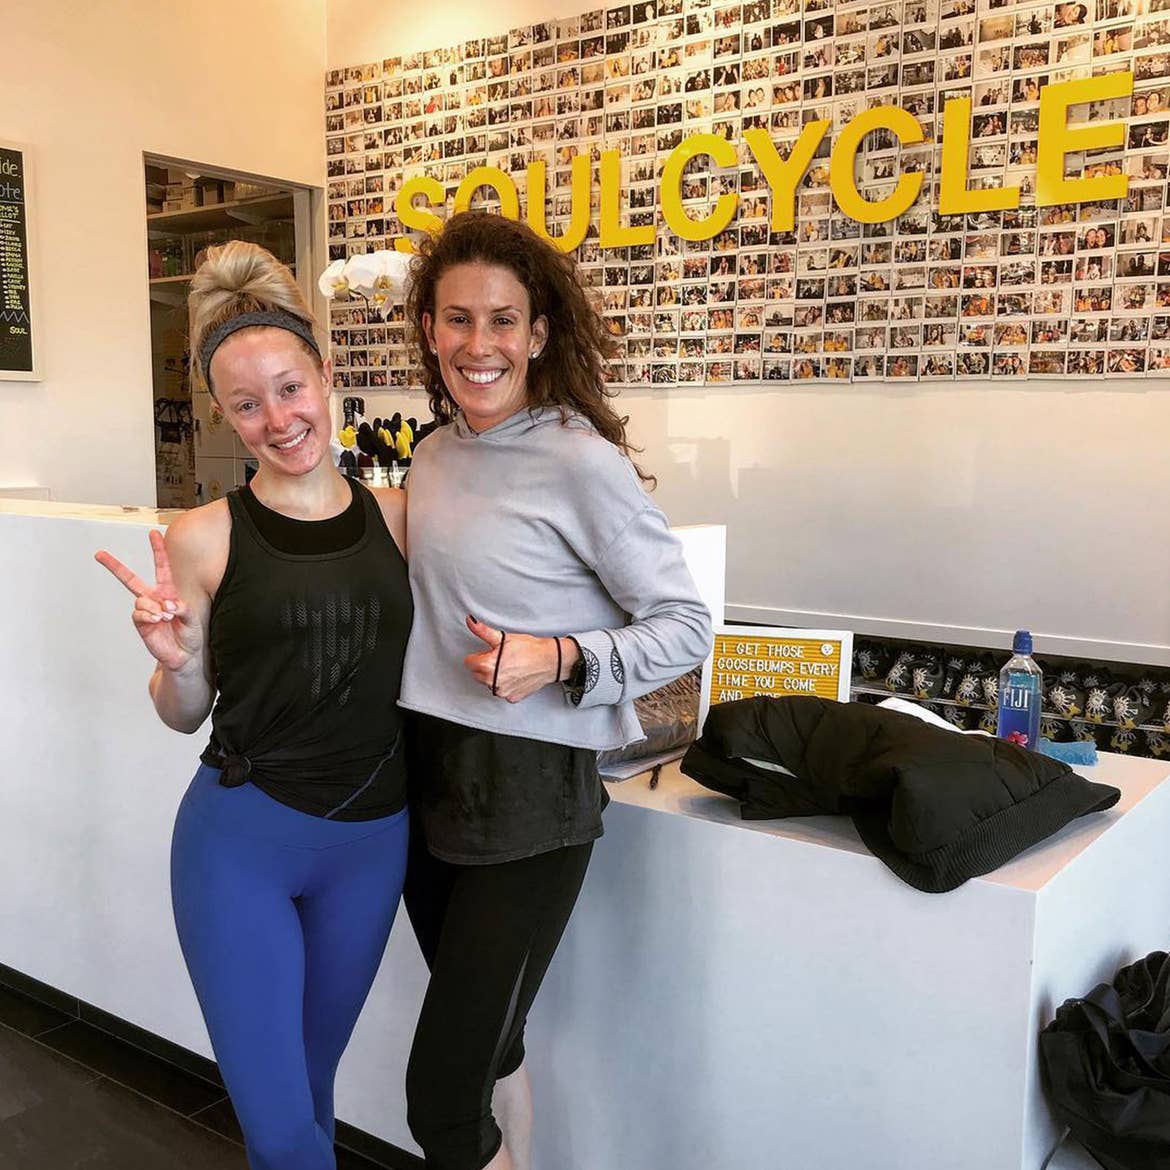 Co-author, Molly (left), wears a black tank and blue leggings while posing with a friend near a SoulCycle entrance.